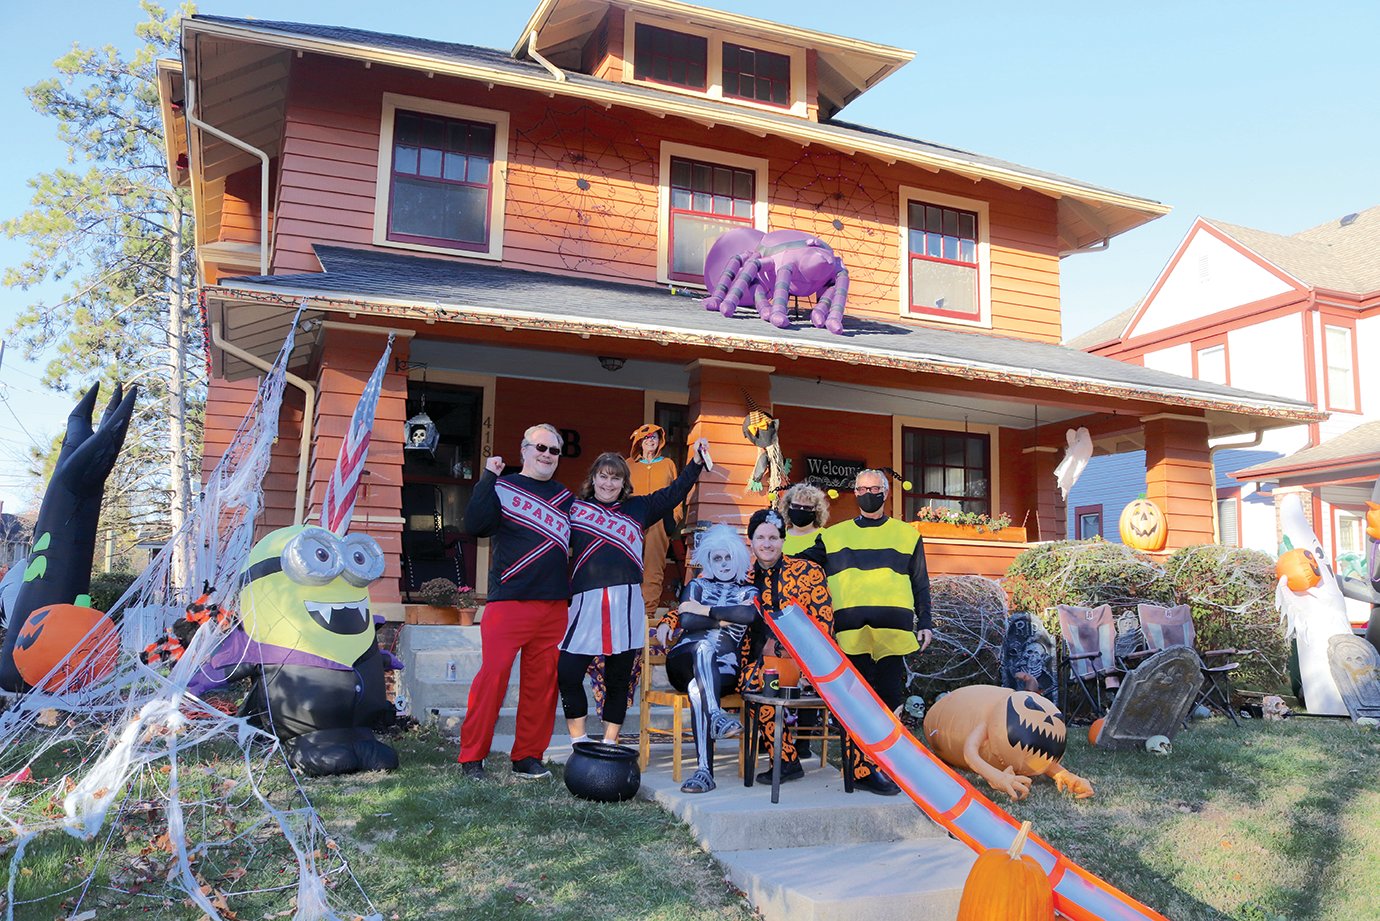 Spartan cheerleaders Kyle and Ashley Brown, left, open their festive home to friends, family and trick-or-treaters Saturday. The Browns were just one of many families on Main Street to transfer candy to visitors by chute.